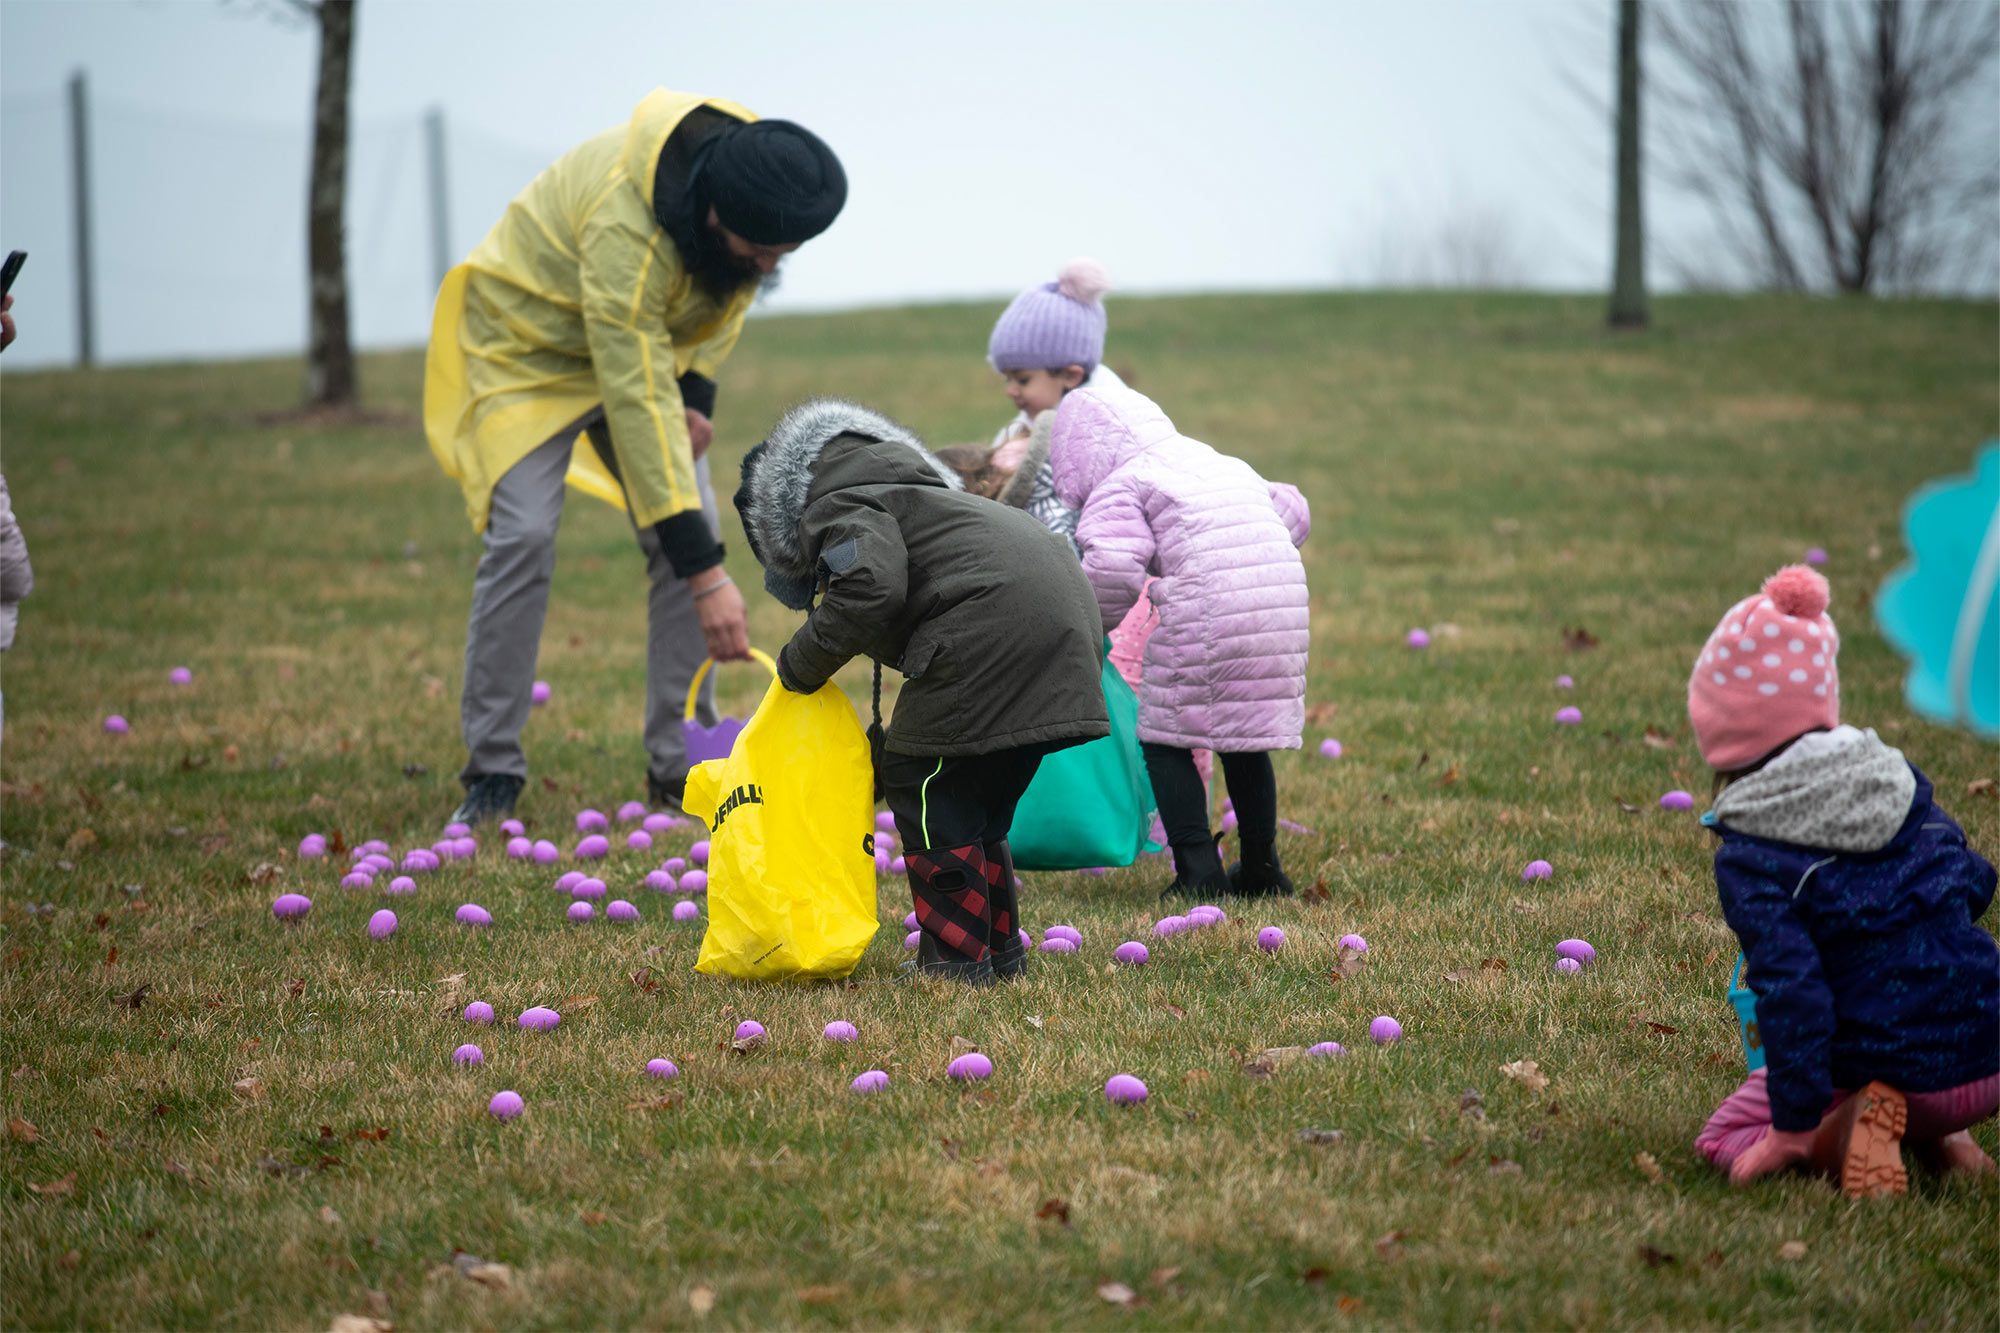 Children searching for eggs at the WFCU Easter Egg Drop